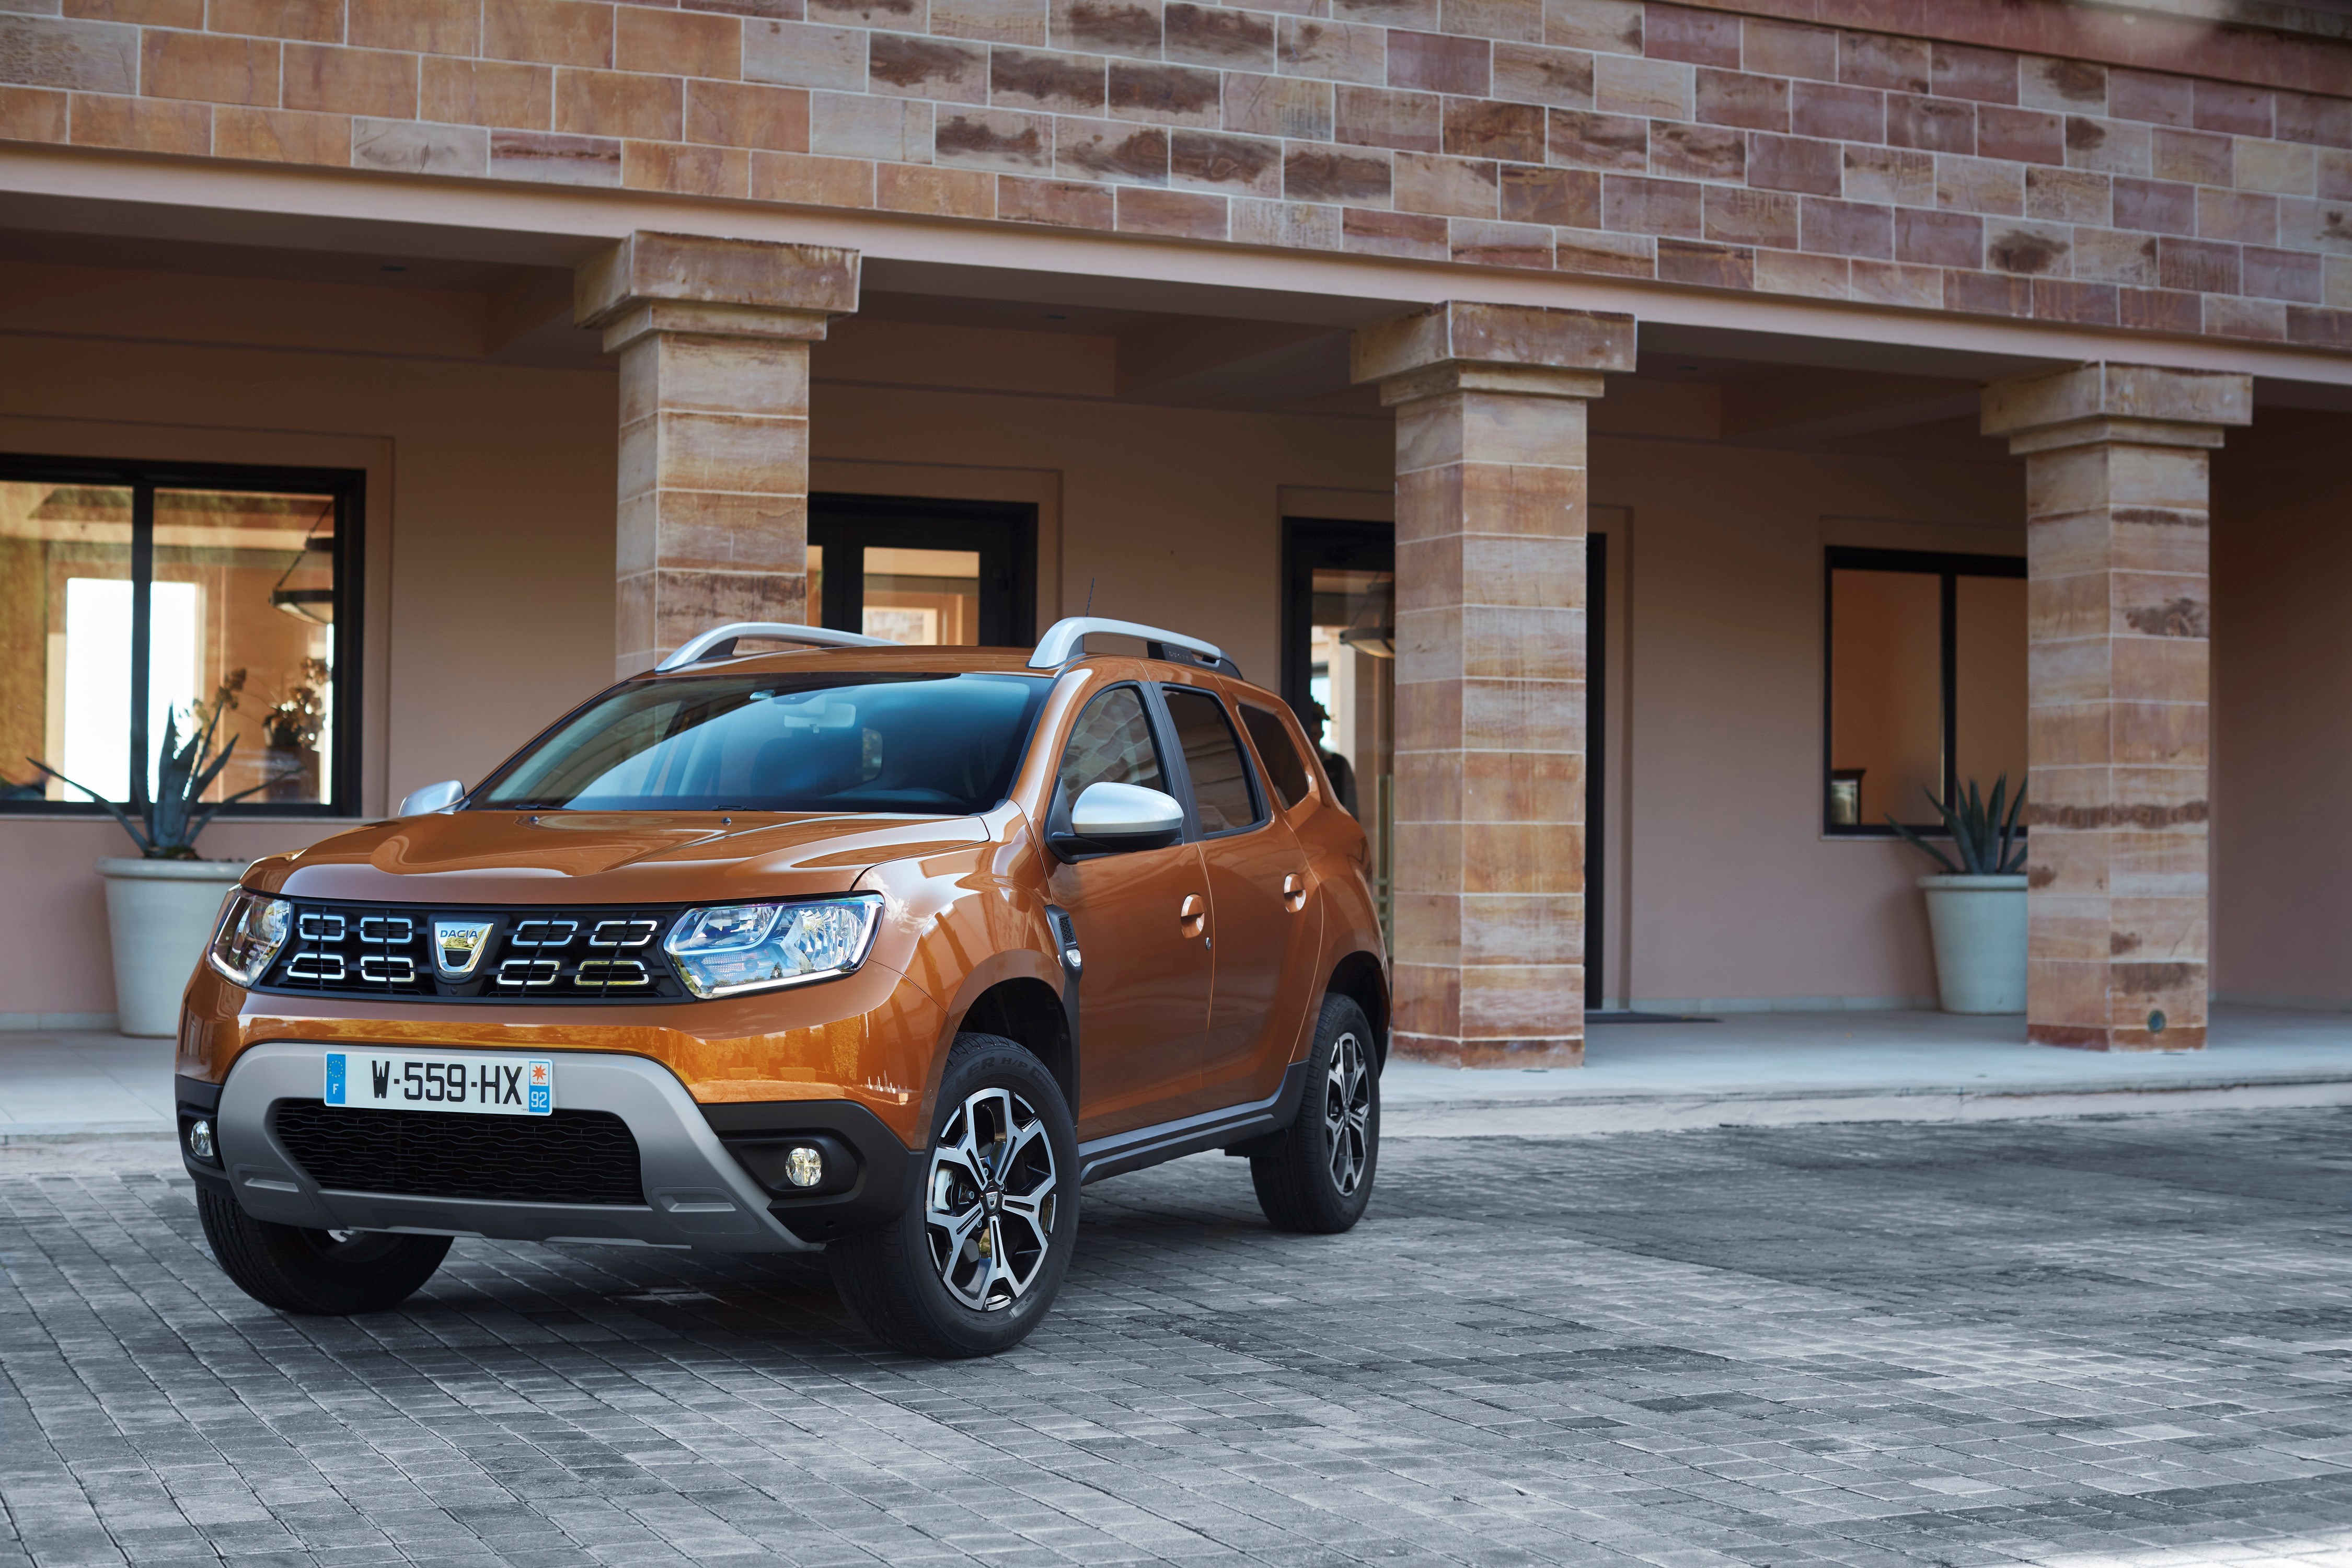 2017 -  New Dacia DUSTER tests drive in Greece